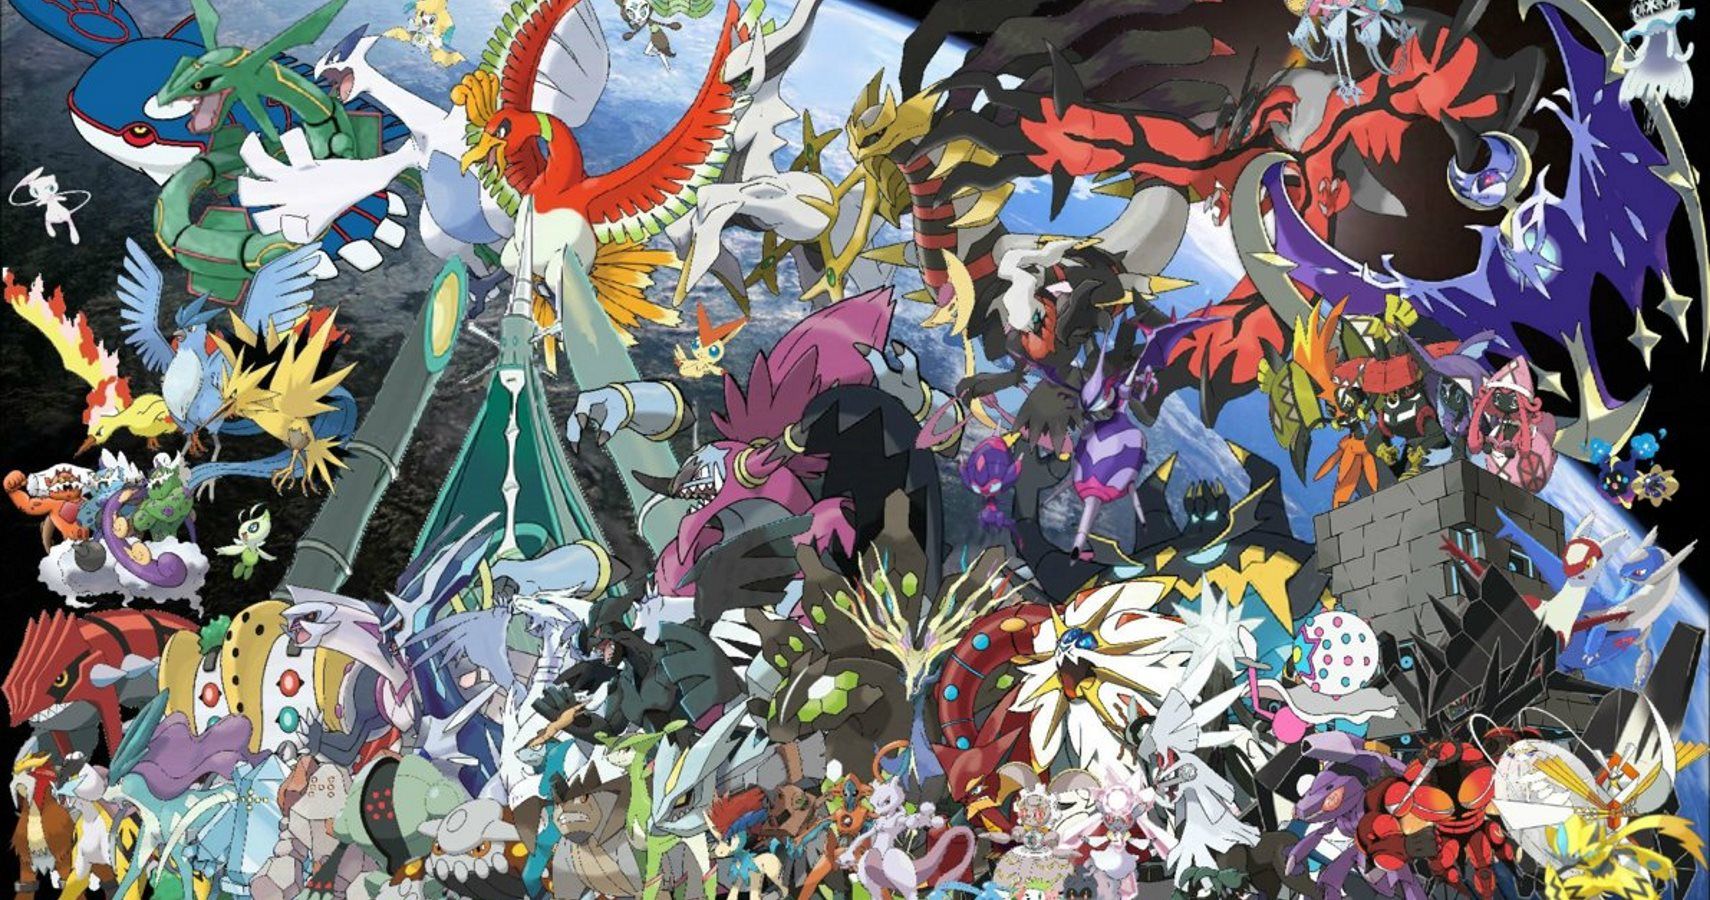 Expect A Ton Of Free Legendary Pokemon In Ultra Sun & Moon